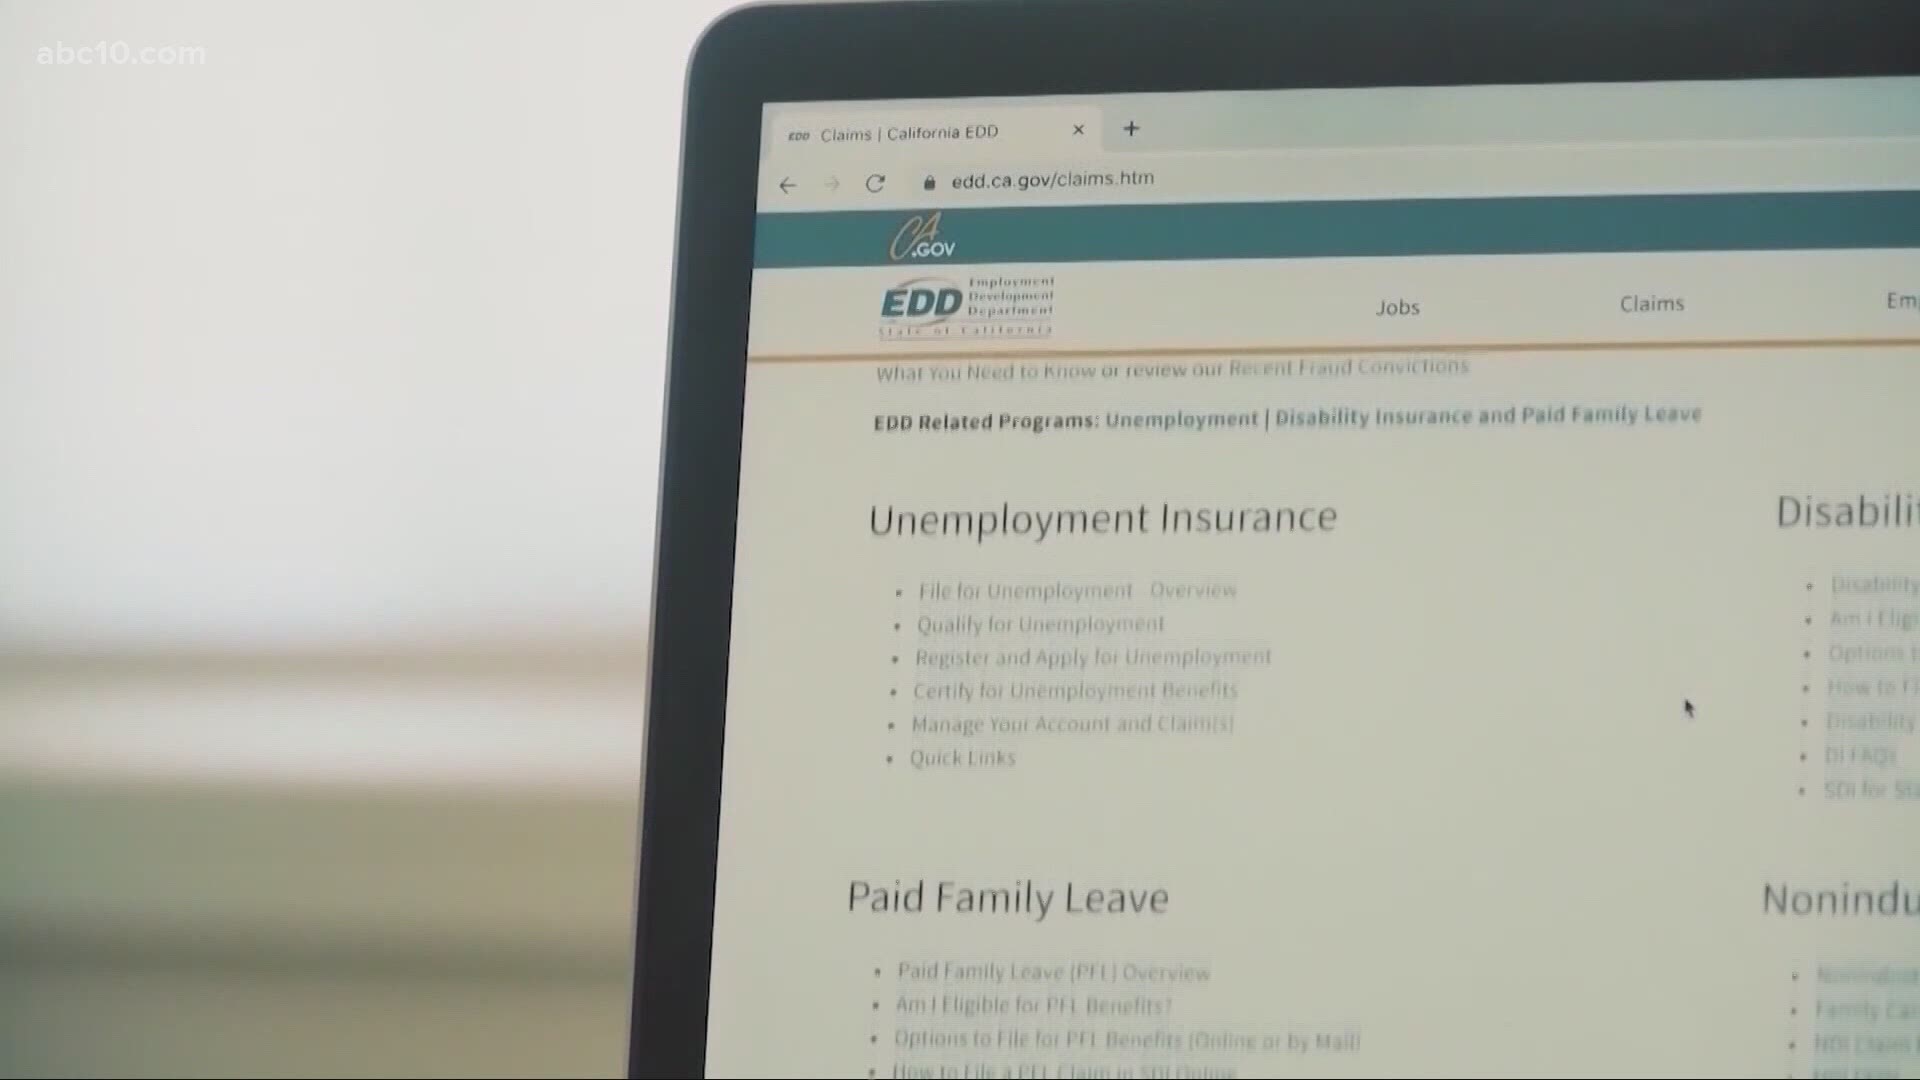 The EDD says it will never contact you via social media to discuss your unemployment claim.